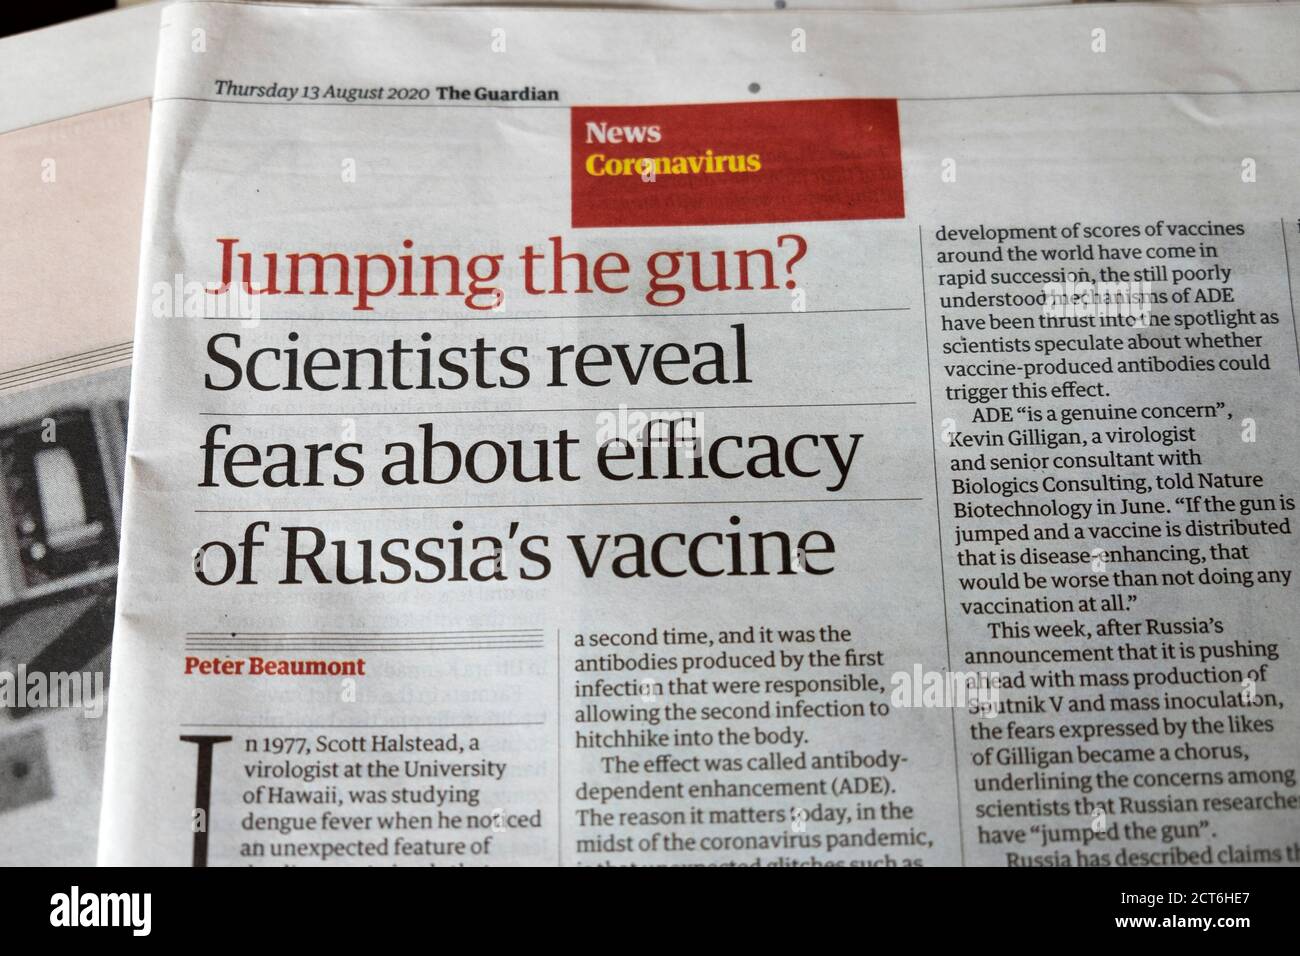 'Jumping the gun? Scientists reveal fears about efficacy of Russia's vaccine' Coronavirus news in Guardian newspaper article  13 August 2020 London UK Stock Photo